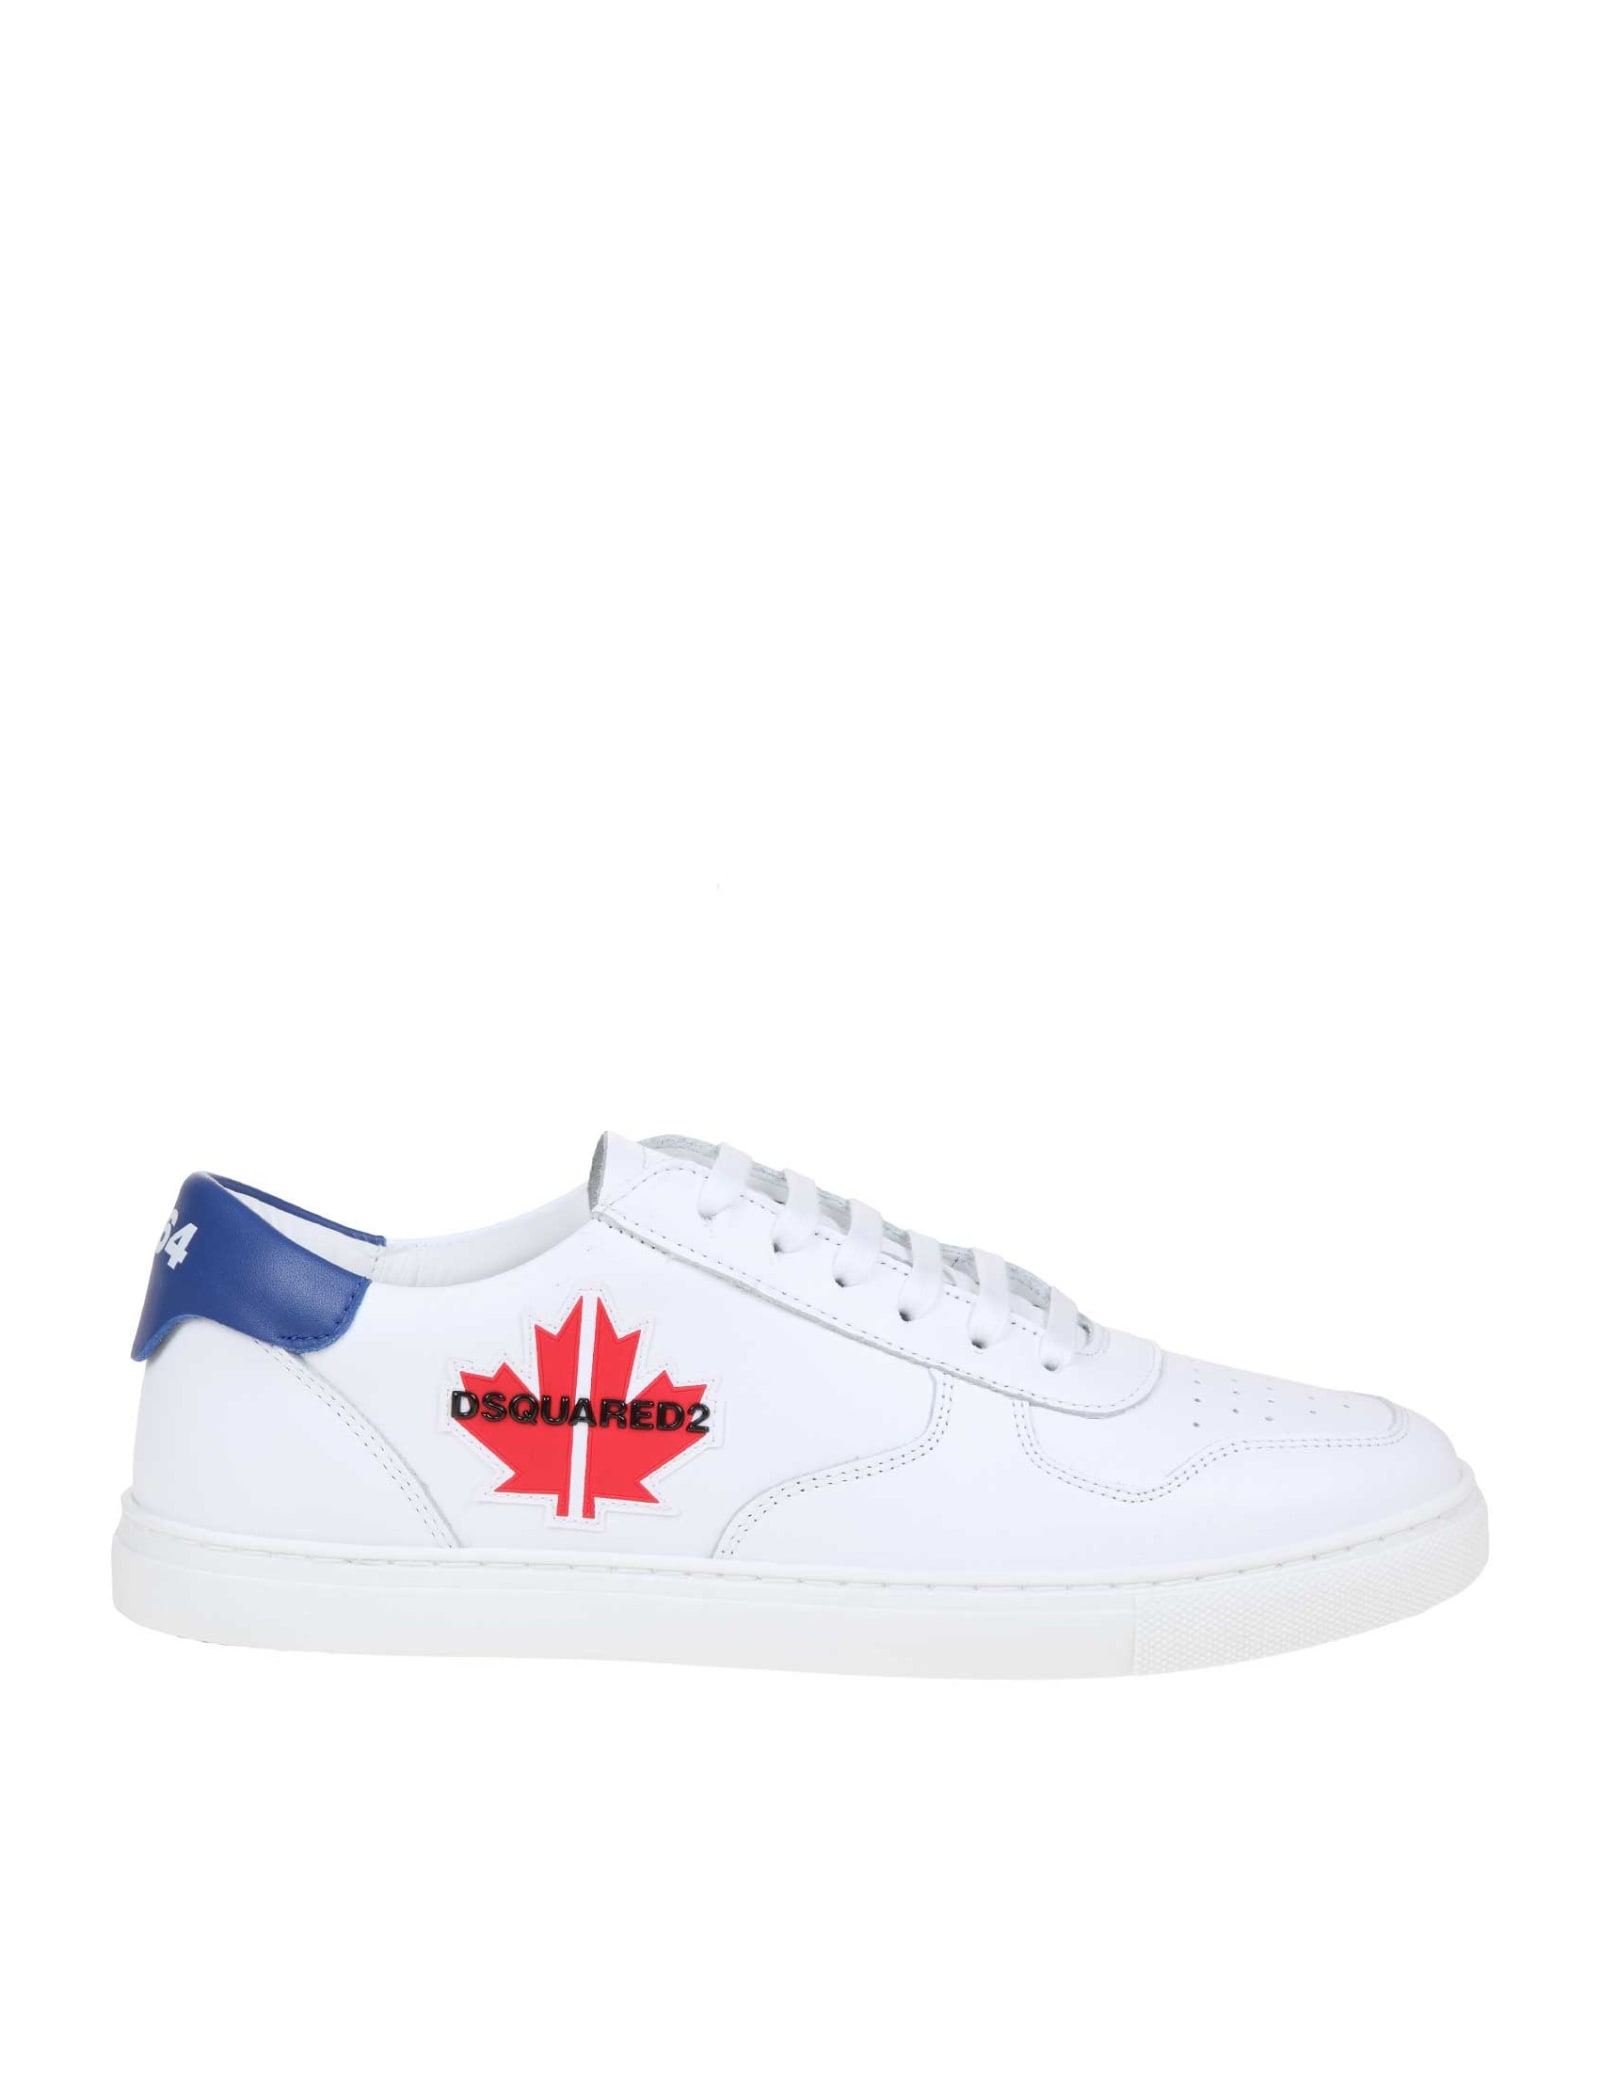 DSQUARED2 MAPLE GYM trainers IN WHITE LEATHER,11247312